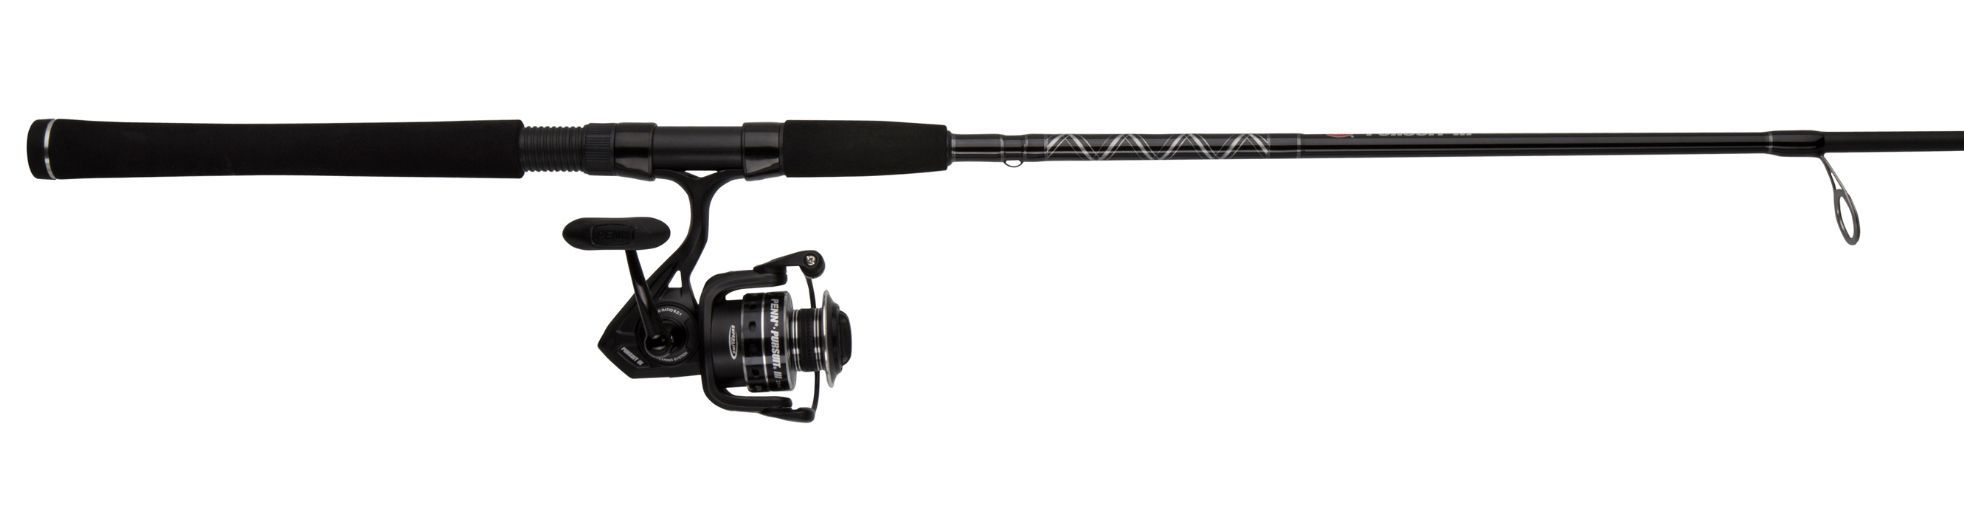 Penn Pursuit III Spinning Combos - TackleDirect